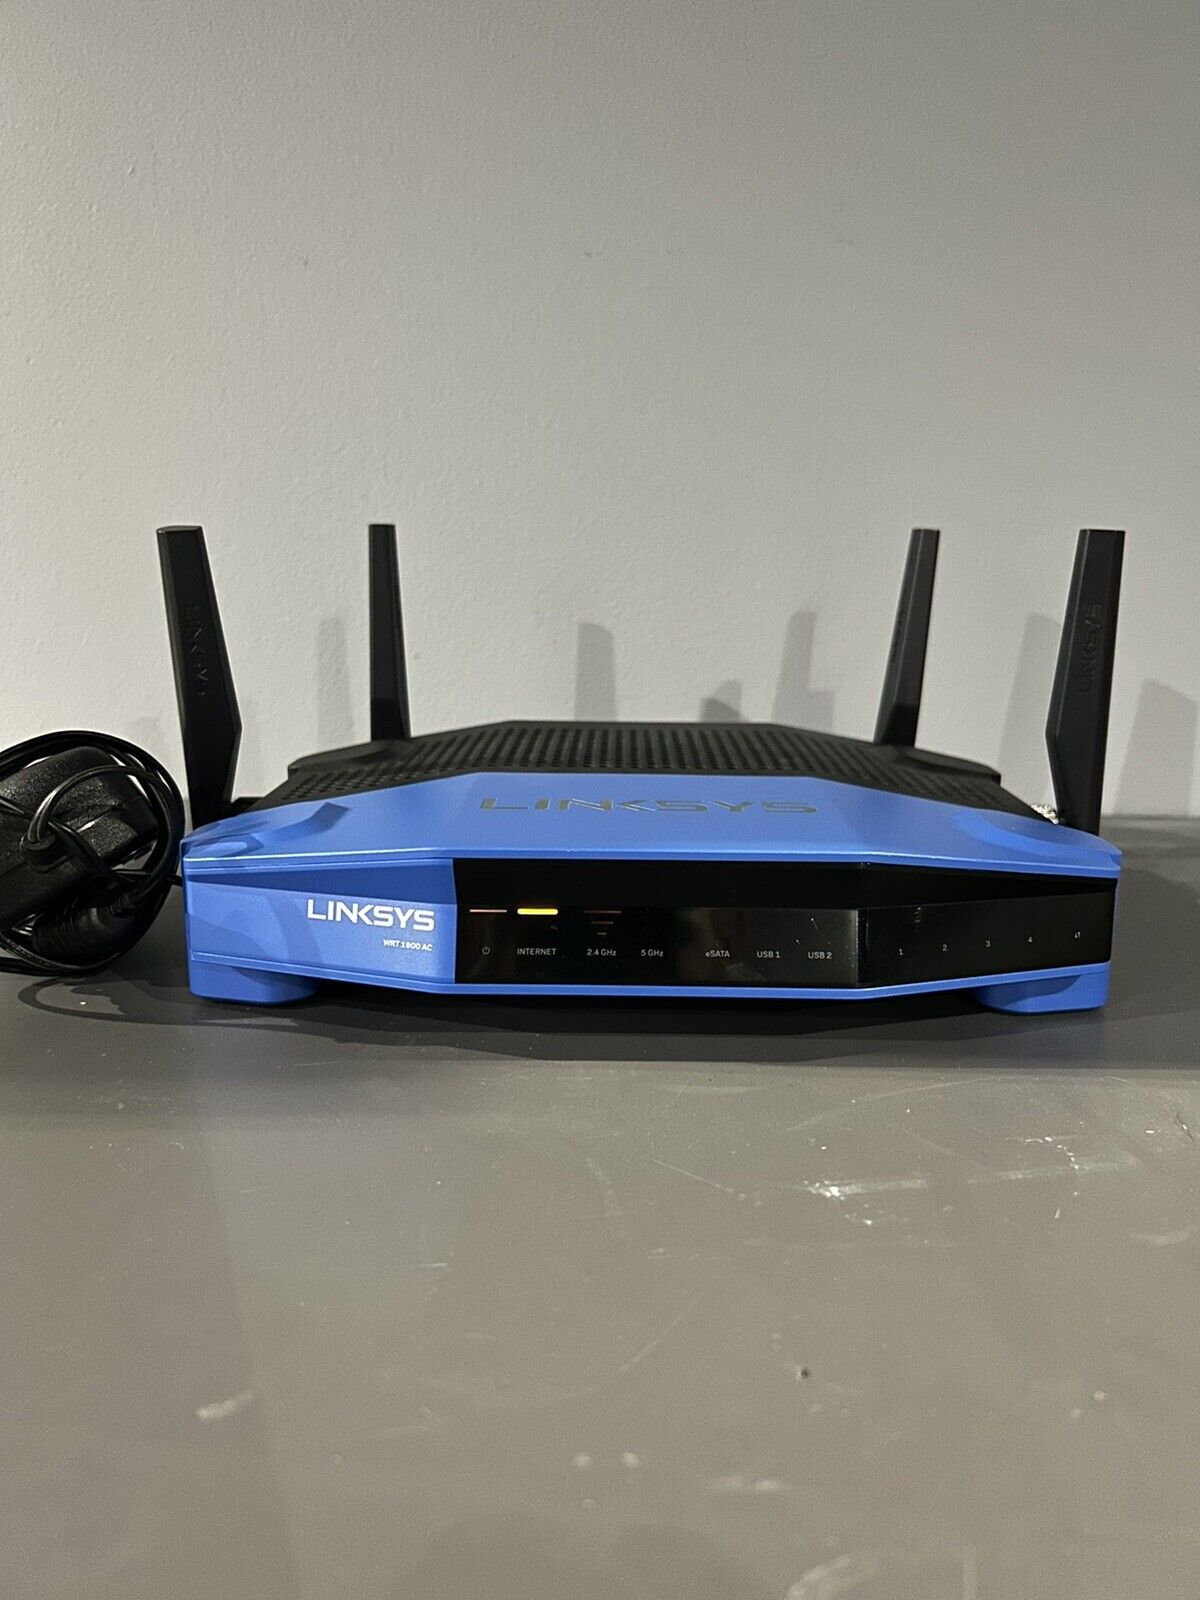 Linksys WRT 1900acs router w/ Secure OpenWRT WireGuard